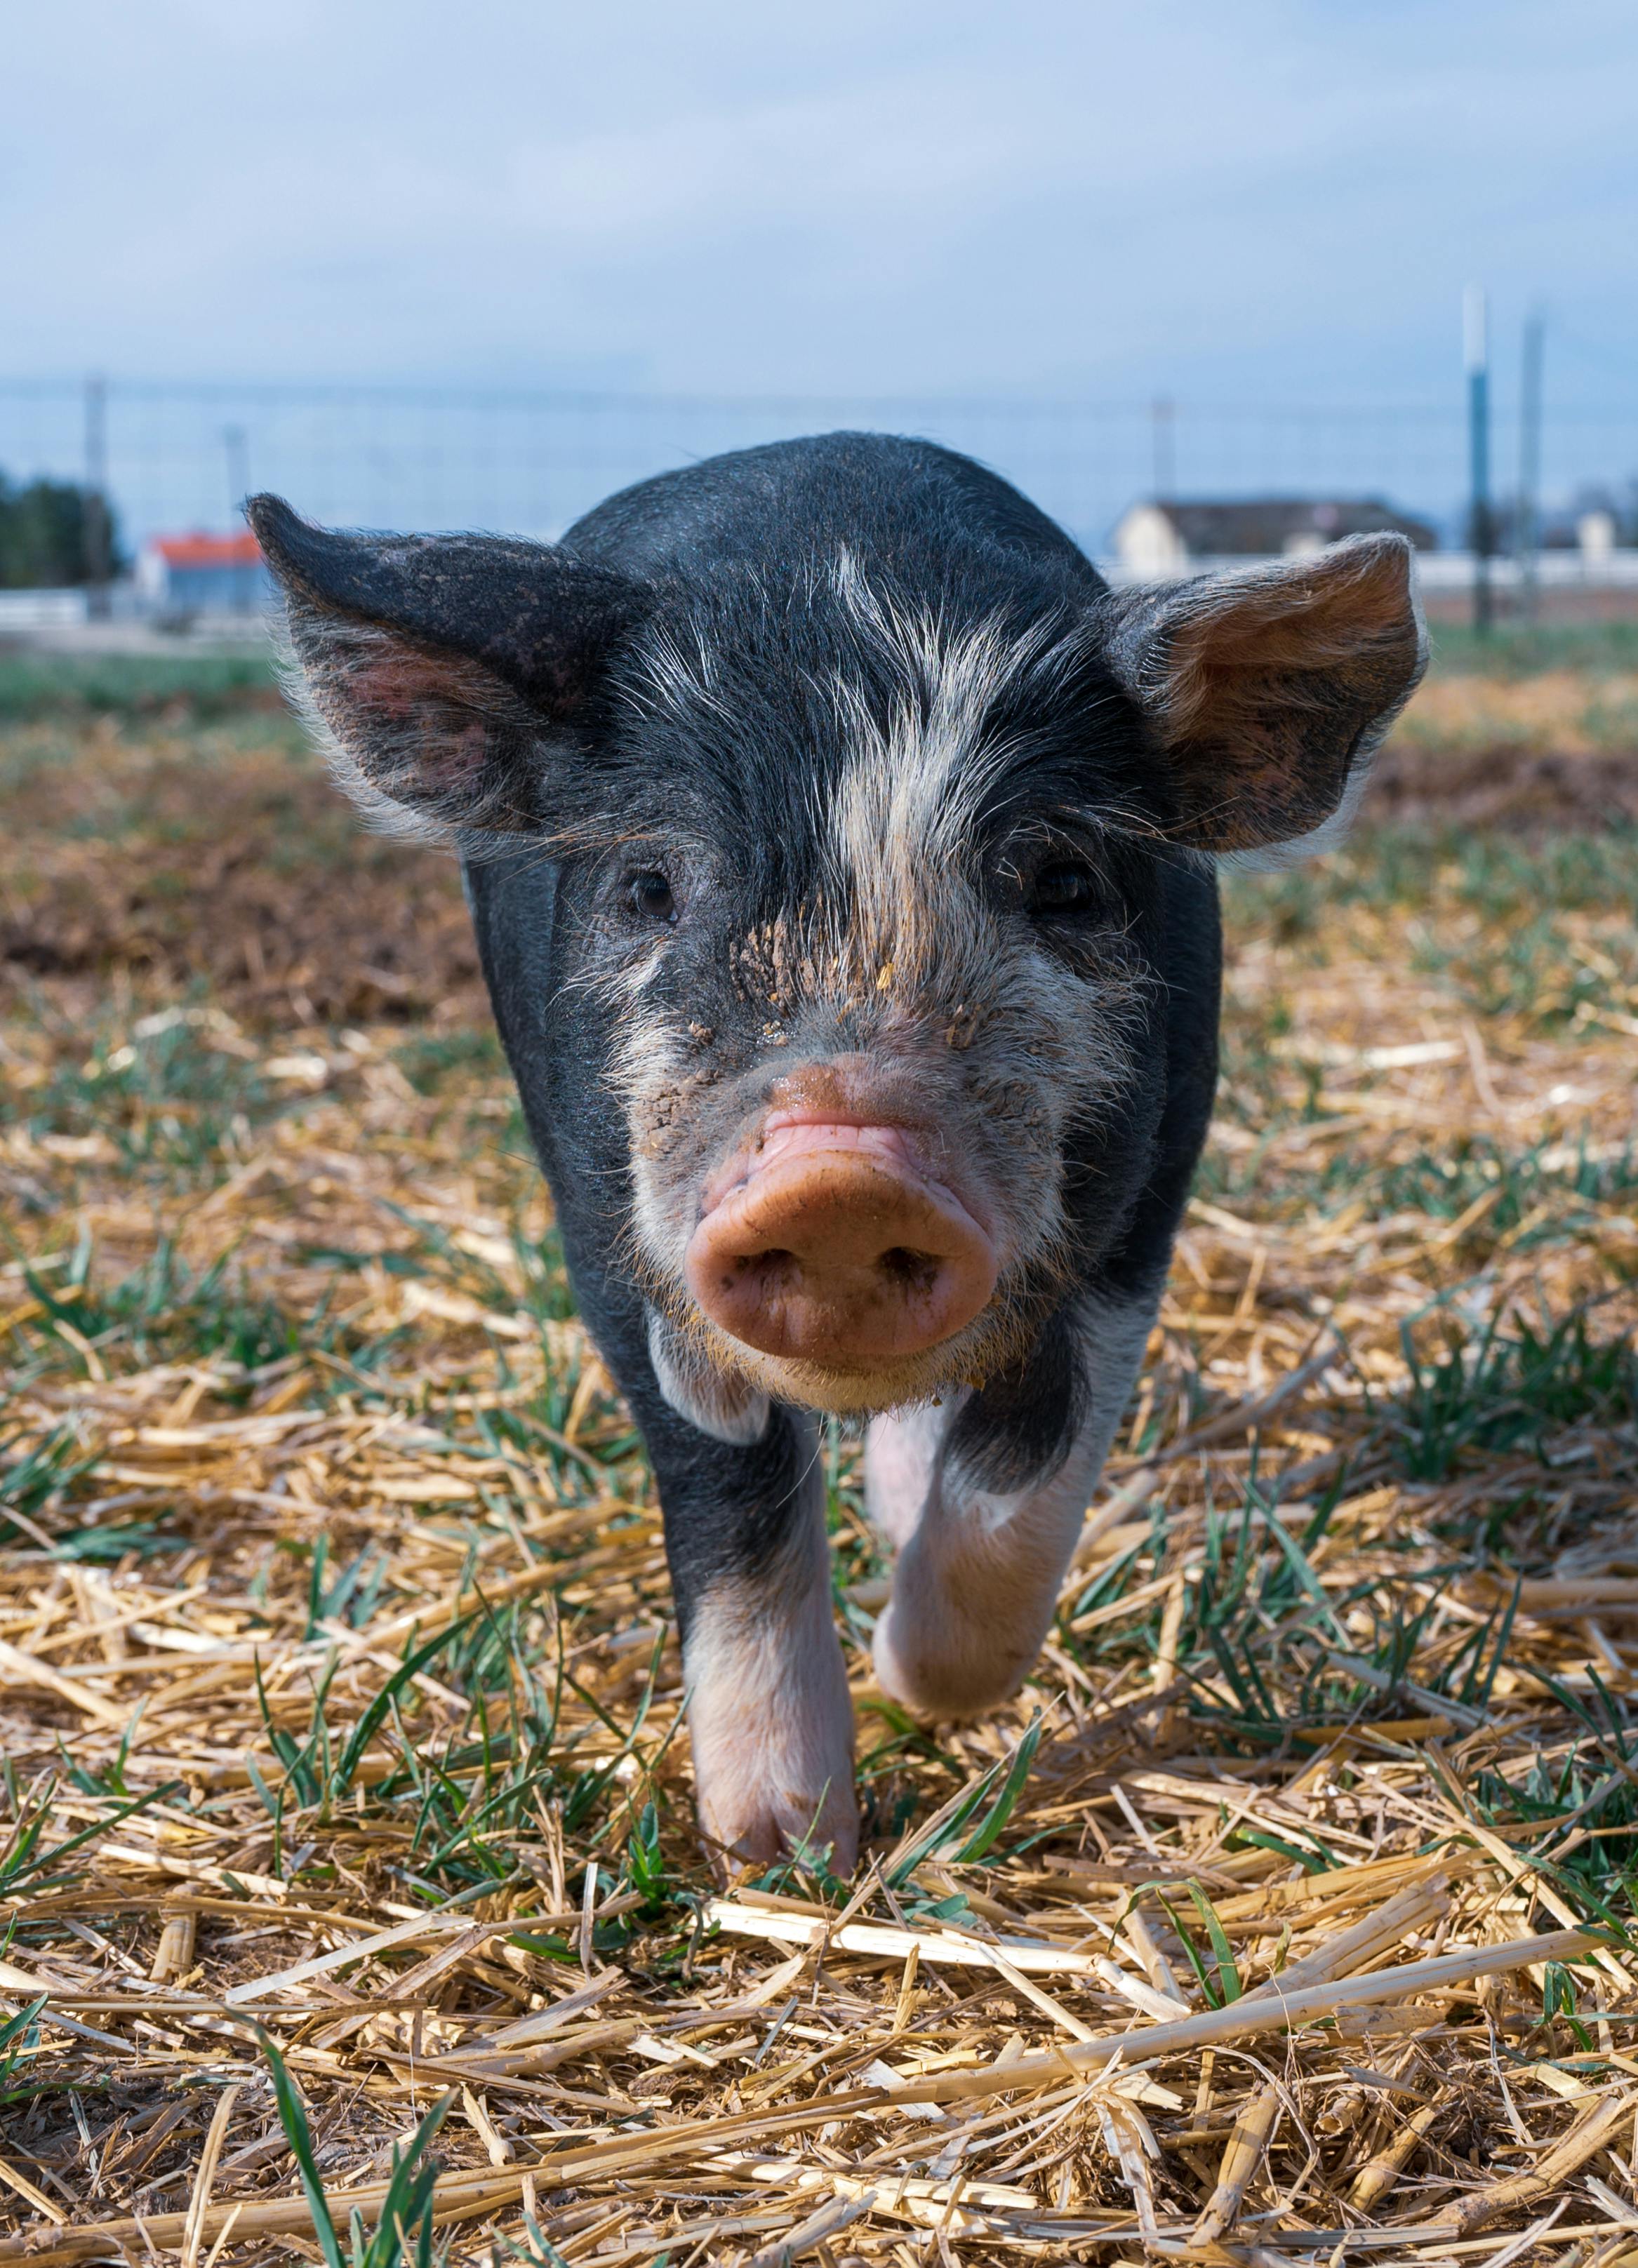 domestic piglet grazing in countryside